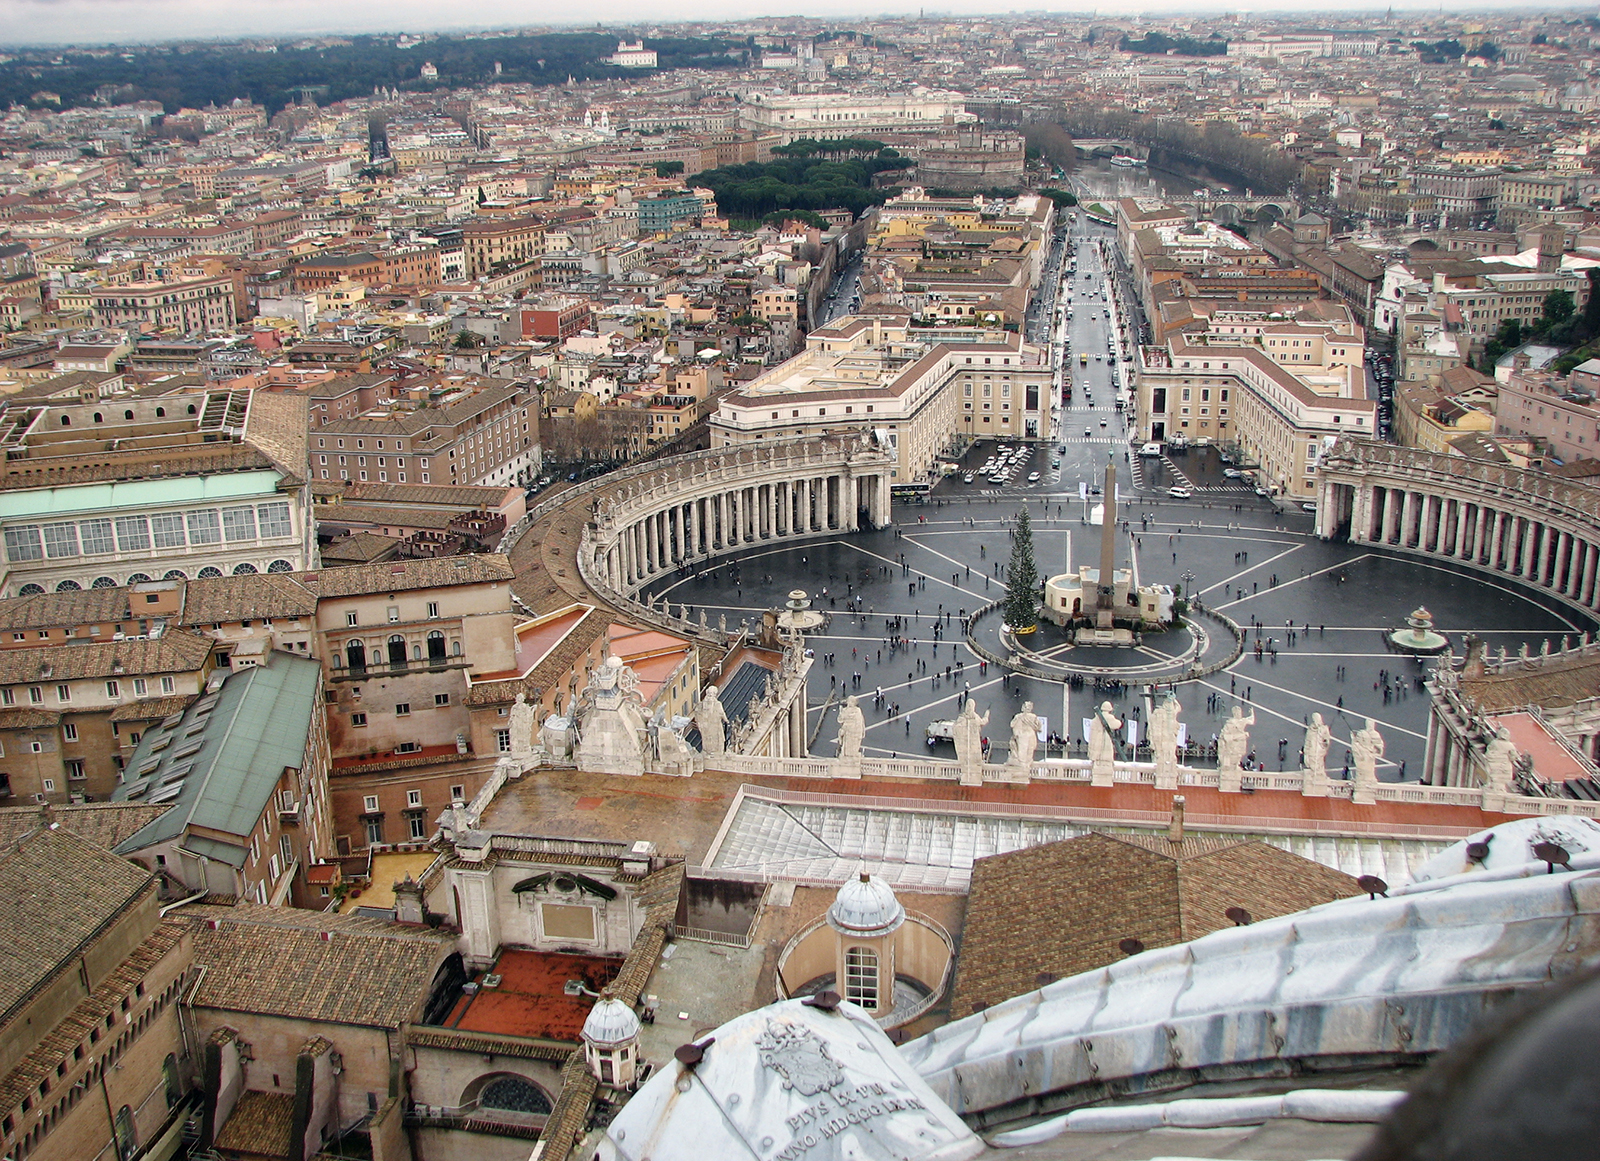 A view of St. Peter’s Square, Vatican City and Rome from the top of Michelangelo’s dome in St. Peter’s Basilica. Photo by Sandexx/Creative Commons/CC BY-SA 3.0